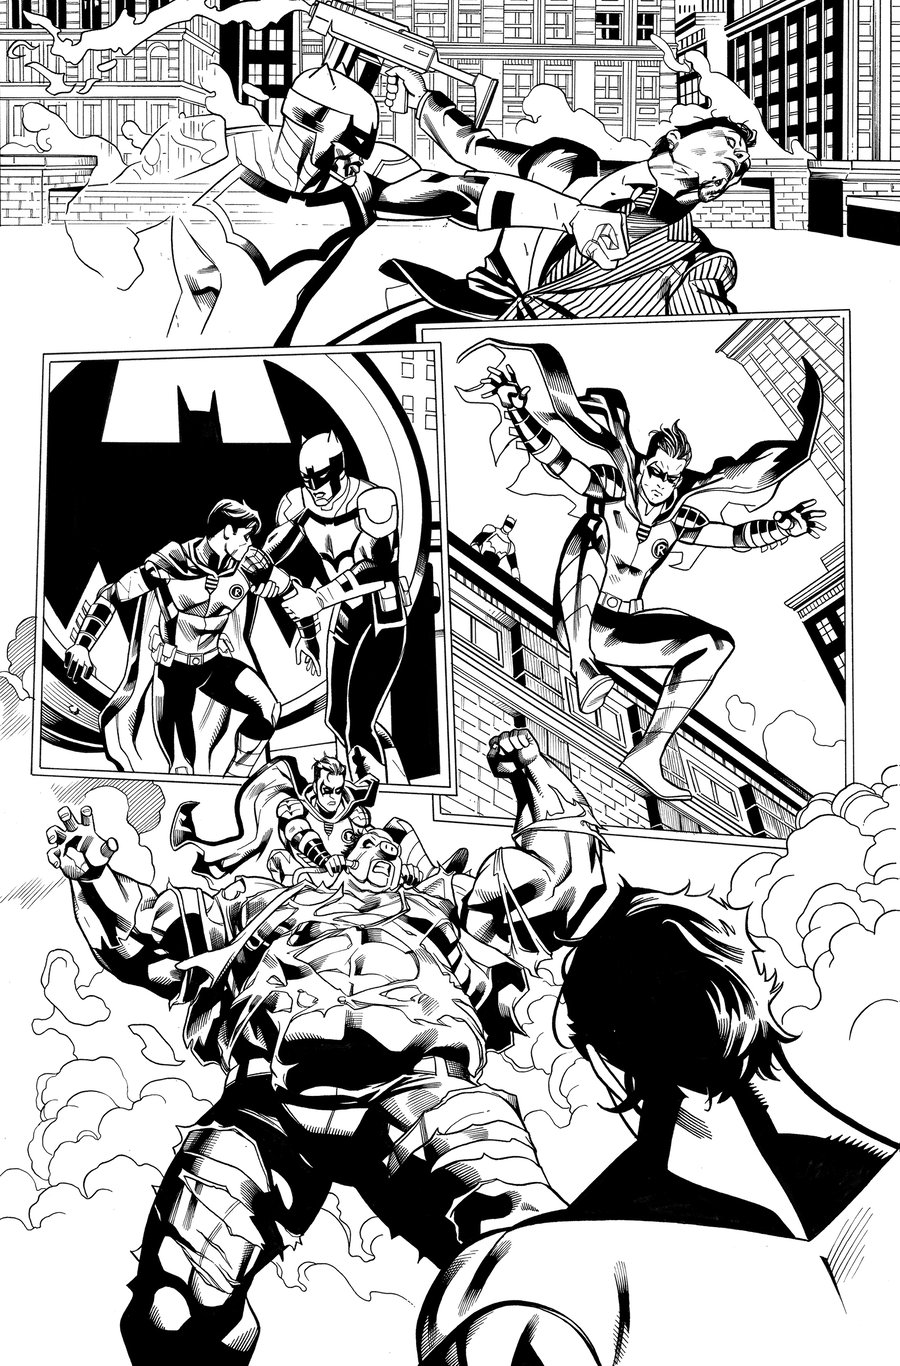 Image of Baatman/Catwoman The Gotham War: Scorched Earth PG 19